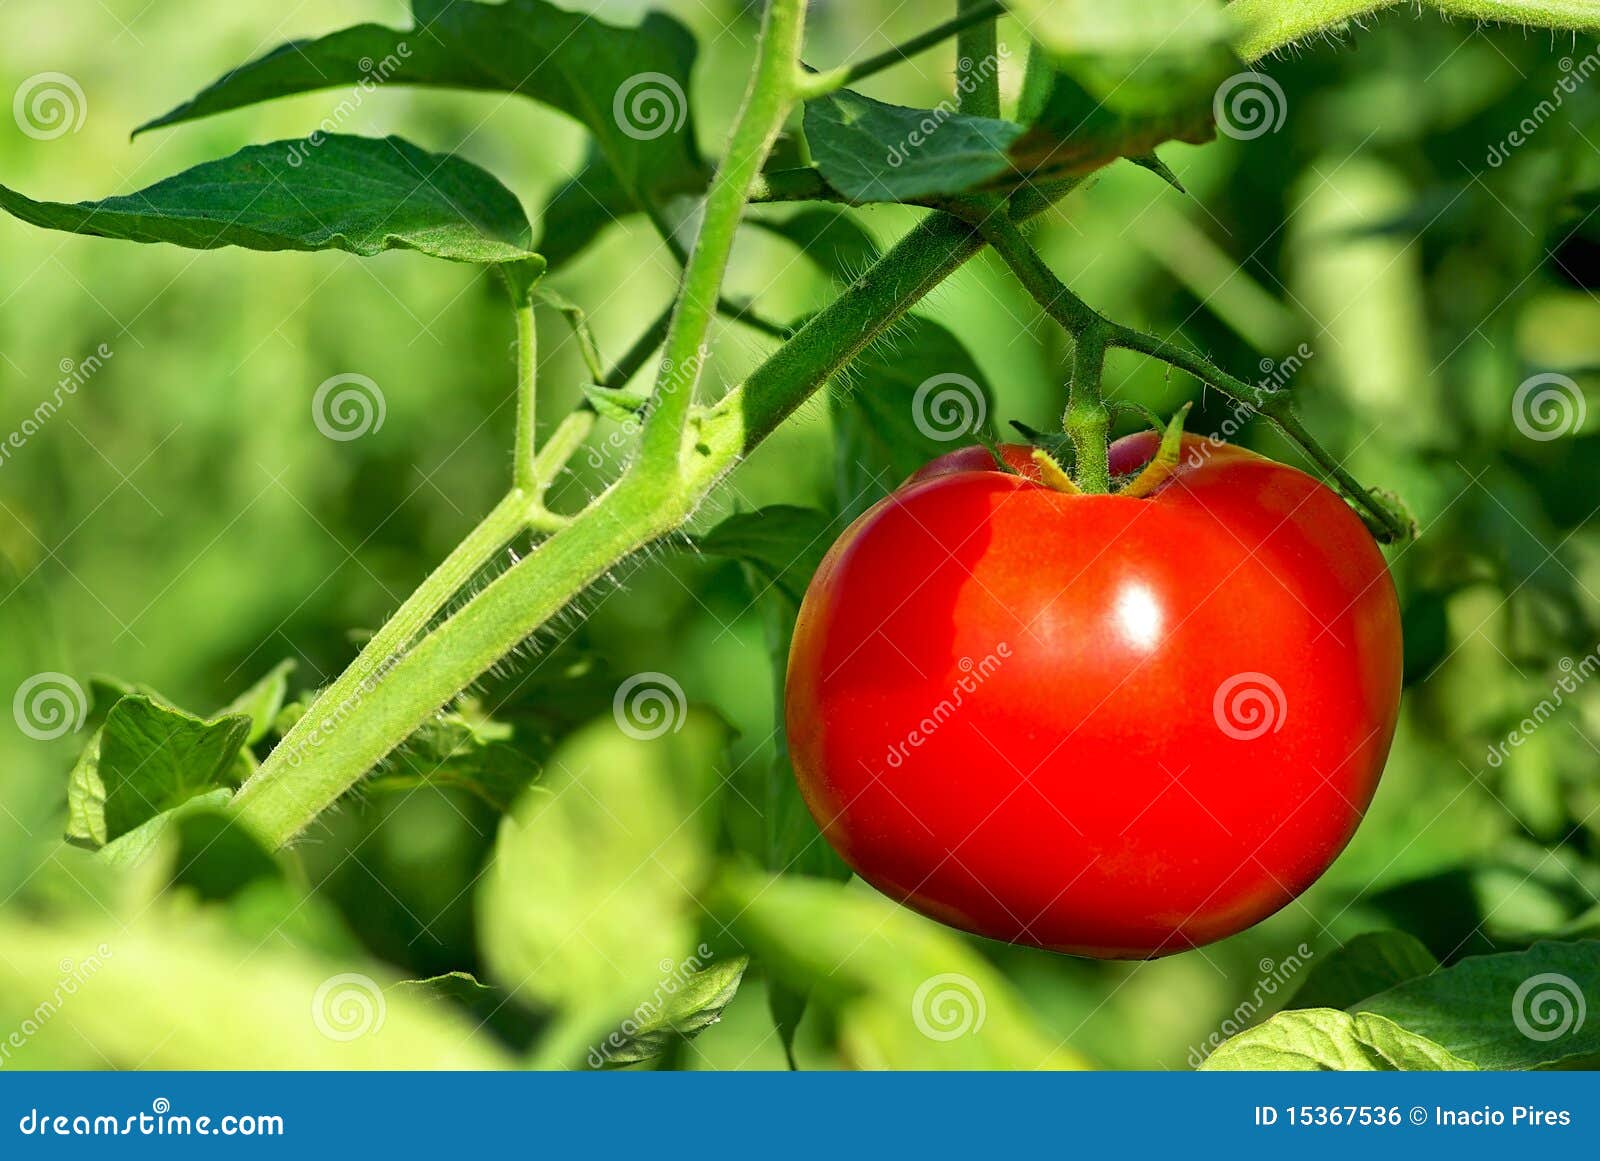 red tomato on plant.